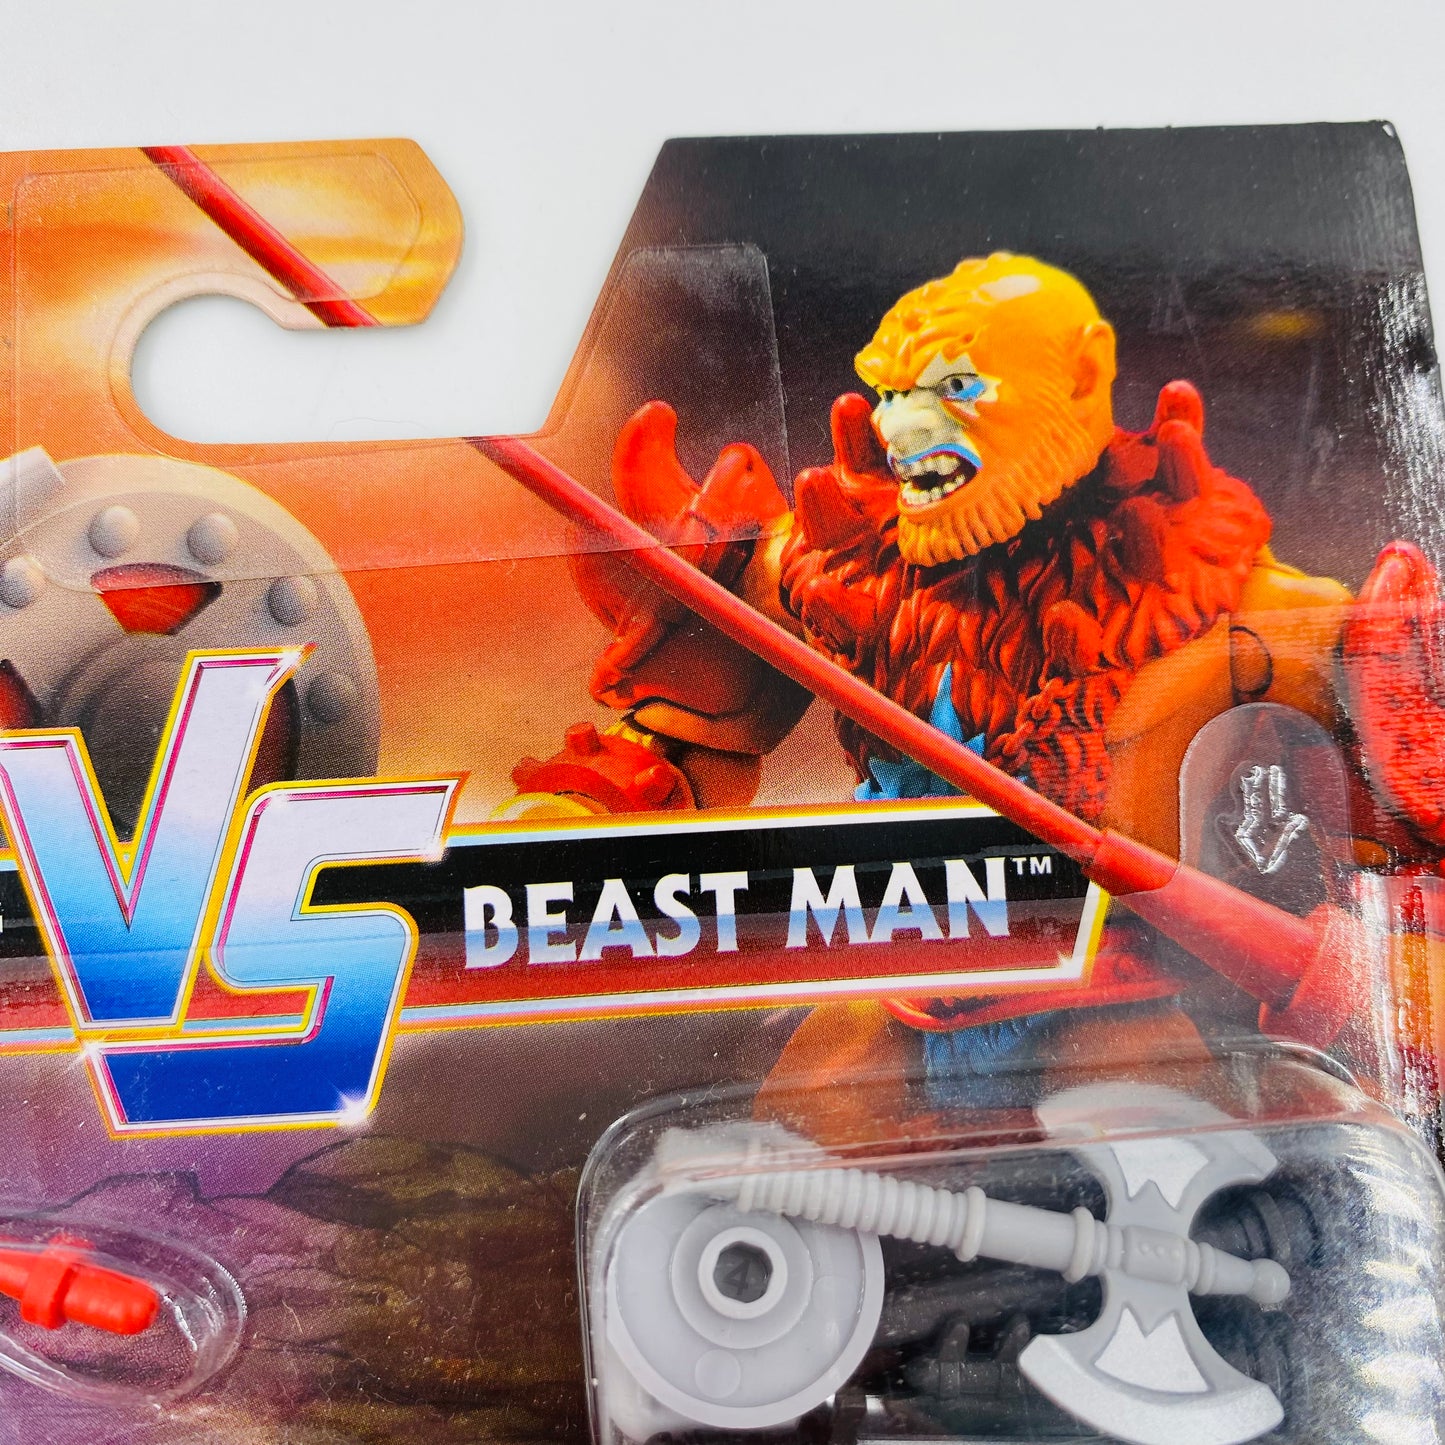 Mega Construx Masters of the Universe He-Man VS Beast Man carded 2” micro action figures (2020) GNN73 Mattel